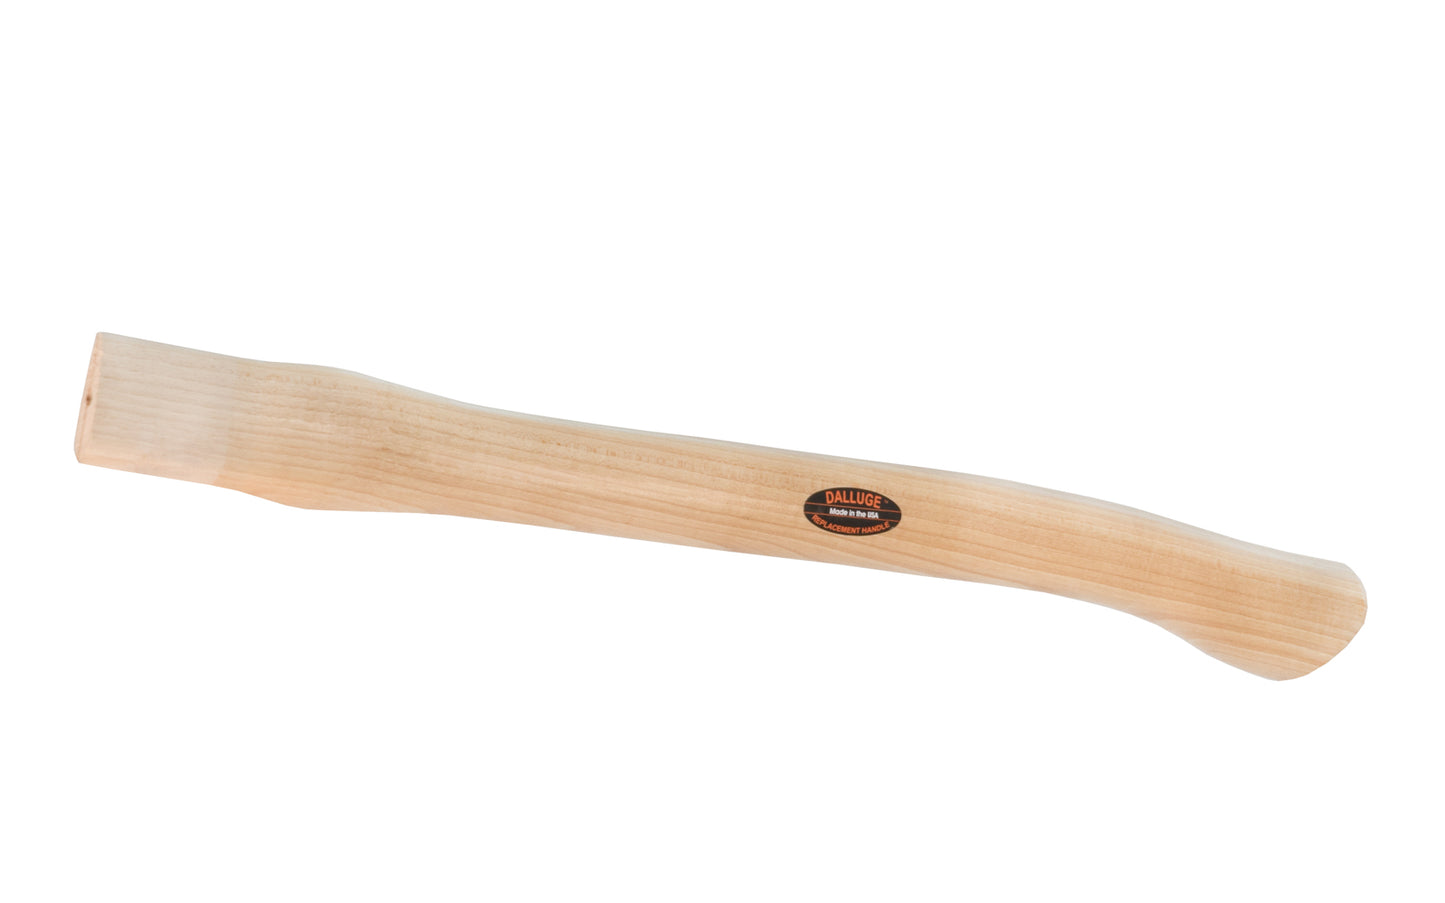 Dalluge 3750 - New Pattern - Curved Replacement Handle fits Dalluge Steel & Titanium models. Made from top quality American hickory & machine-gauged to precise balance, then double-sanded, buffed & lacquered. 03750. Includes wood wedge & two steel wedges. Vaughan & Bushnell Mfg. Made in USA. 698250037503